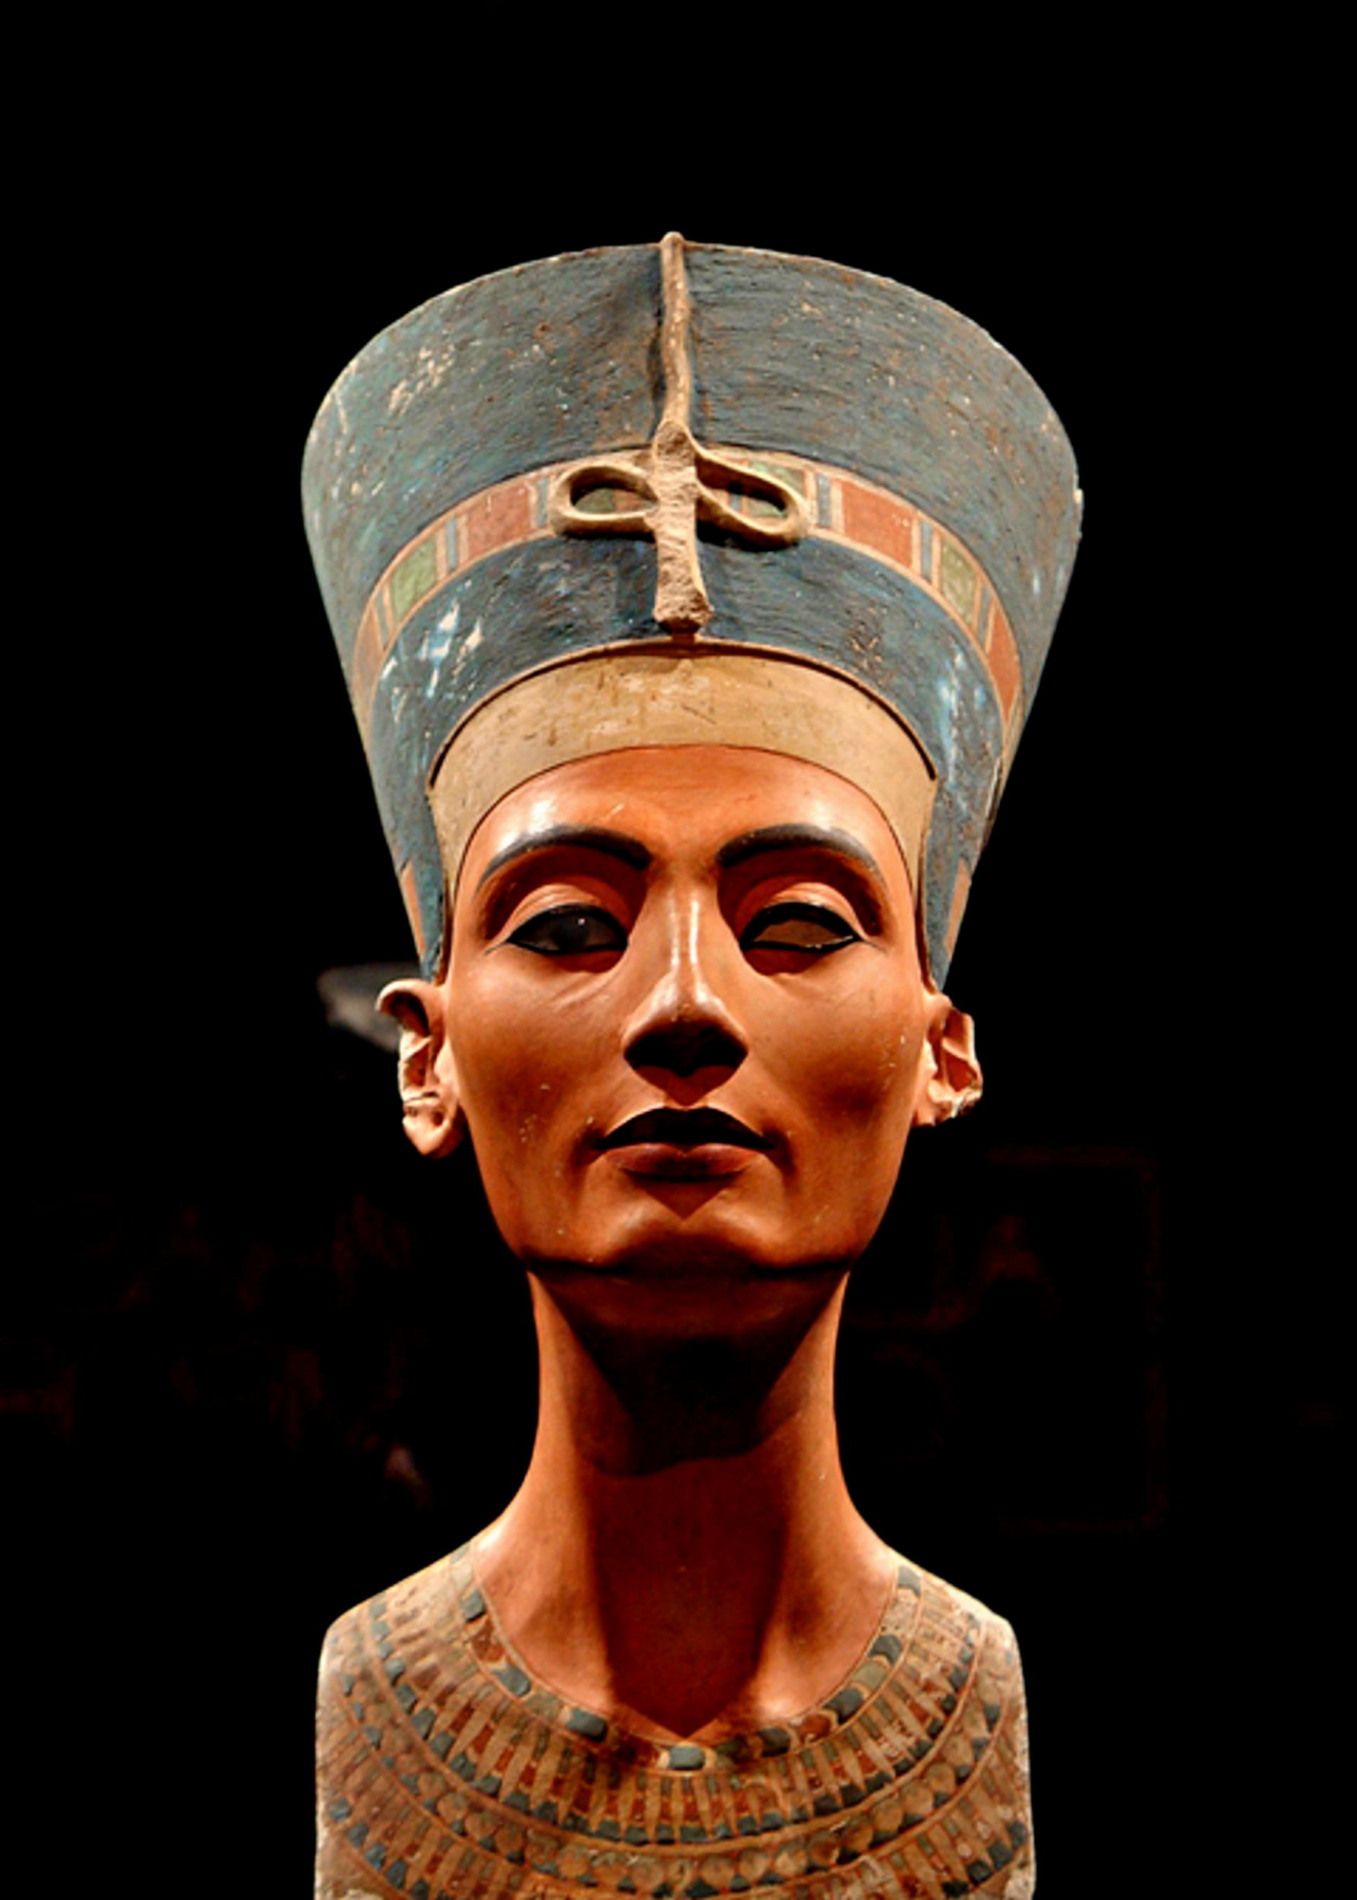 Nefertiti Bust of the Neues Museum, Museumsinsel or Museum Island of Berlin: Whizzed Net